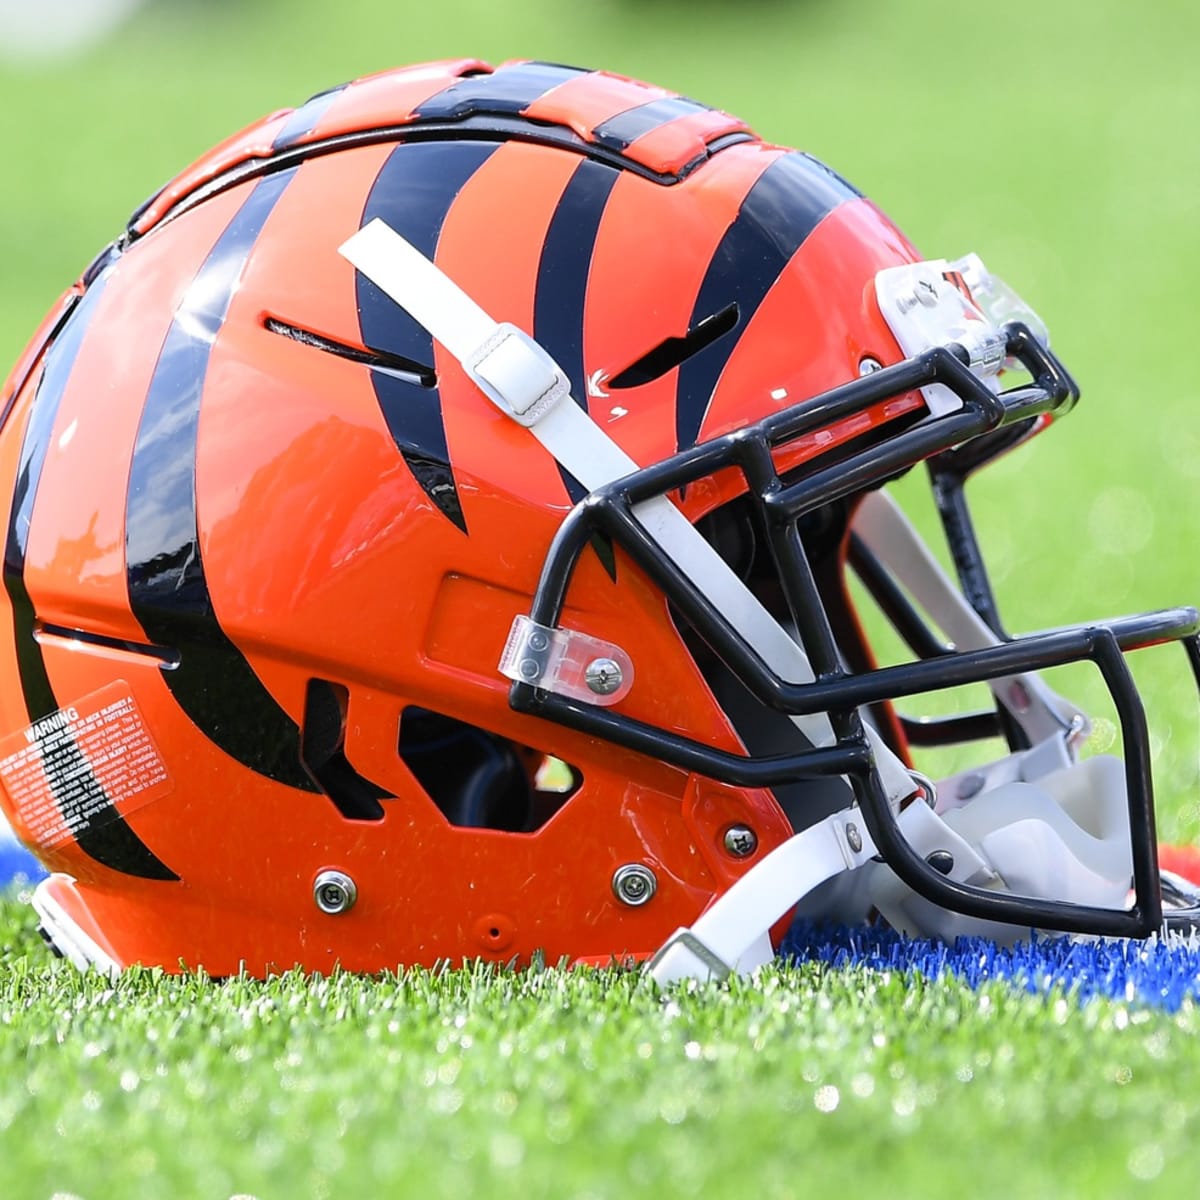 Bengals to wear 'White Bengal' uniforms for 2 MNF games in 2023-24 season